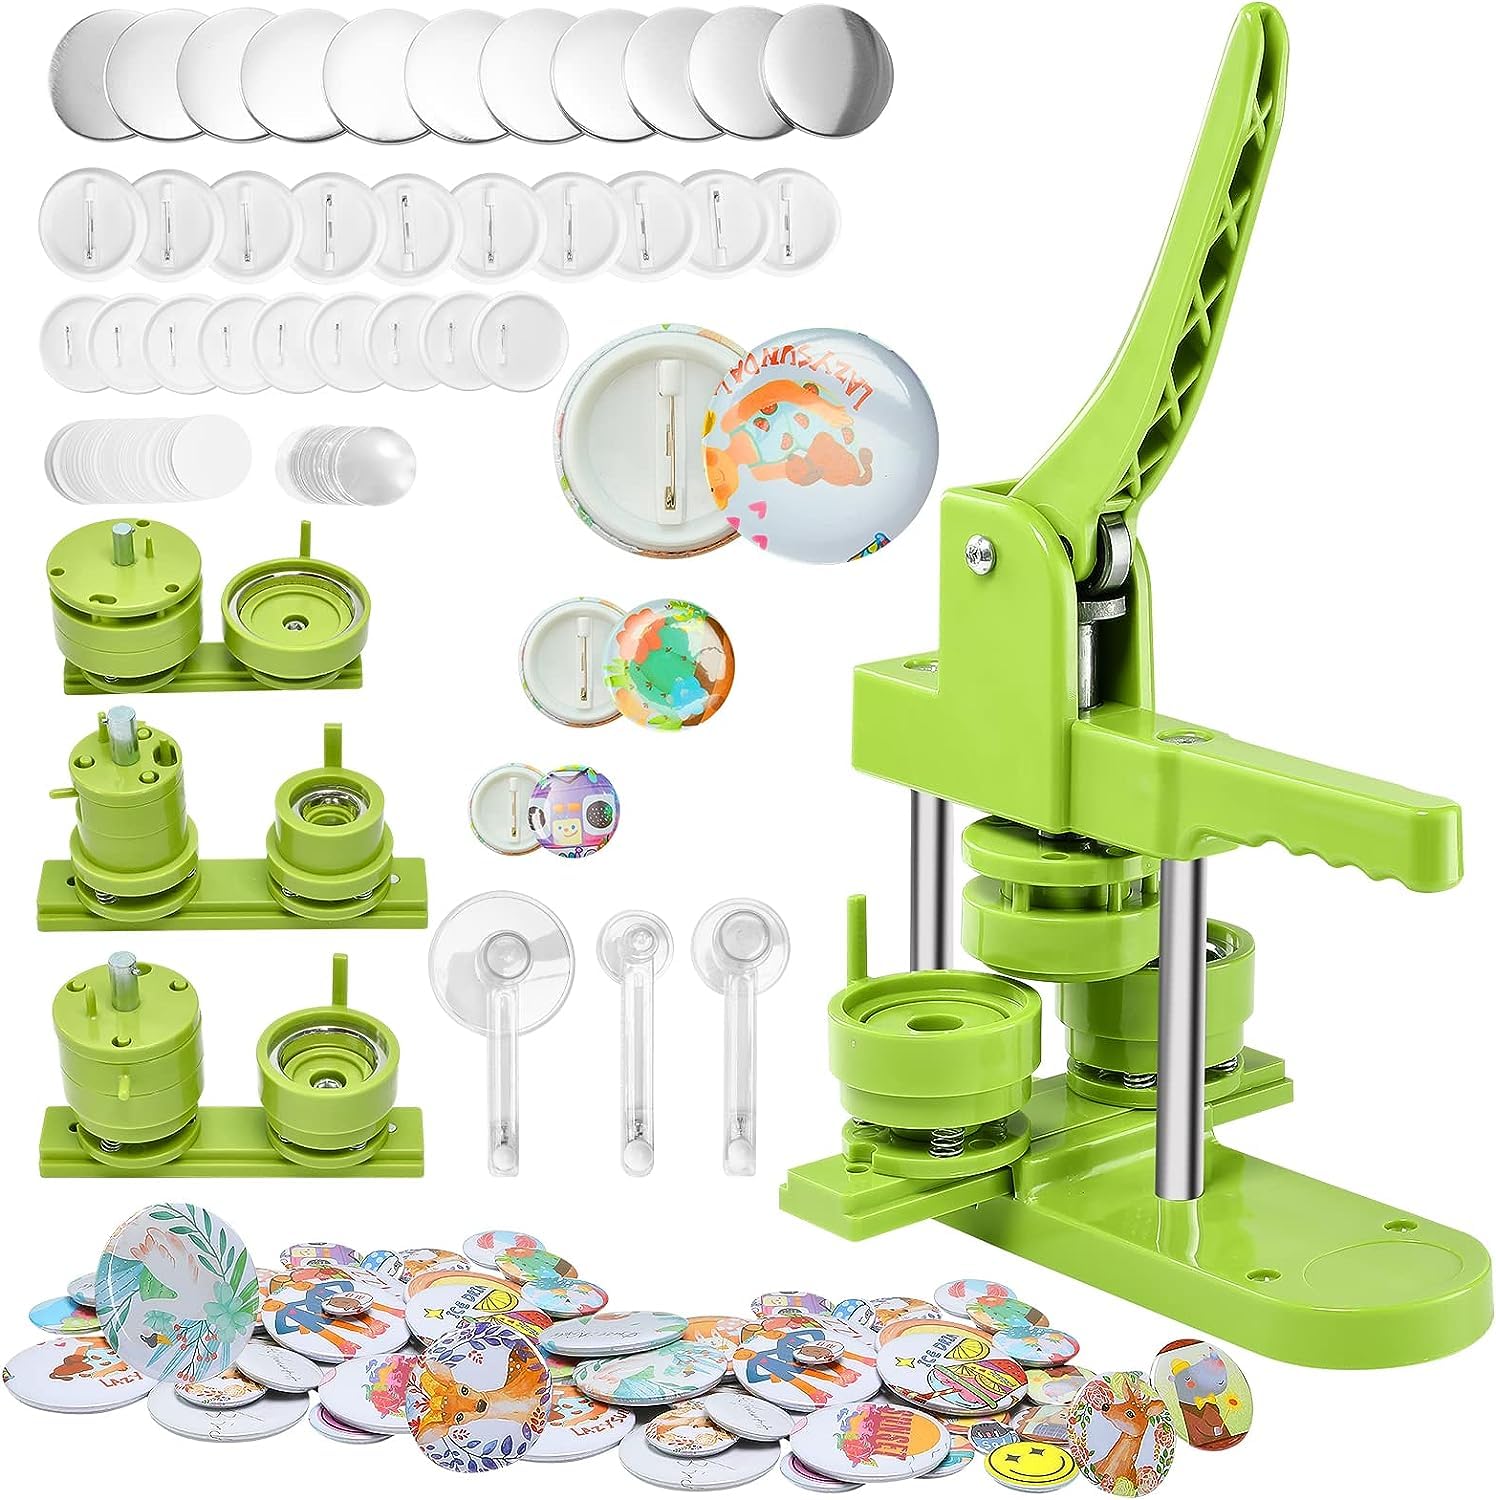 Button Maker Machine Multiple Sizes 400pcs: Aiment 25/44/75mm Badge Pin Maker Button Press with Free 400Pcs 1/1.73/3 inch Button Parts Pin Supplies & Circle Cutters & Pictures for Halloween DIY Gifts